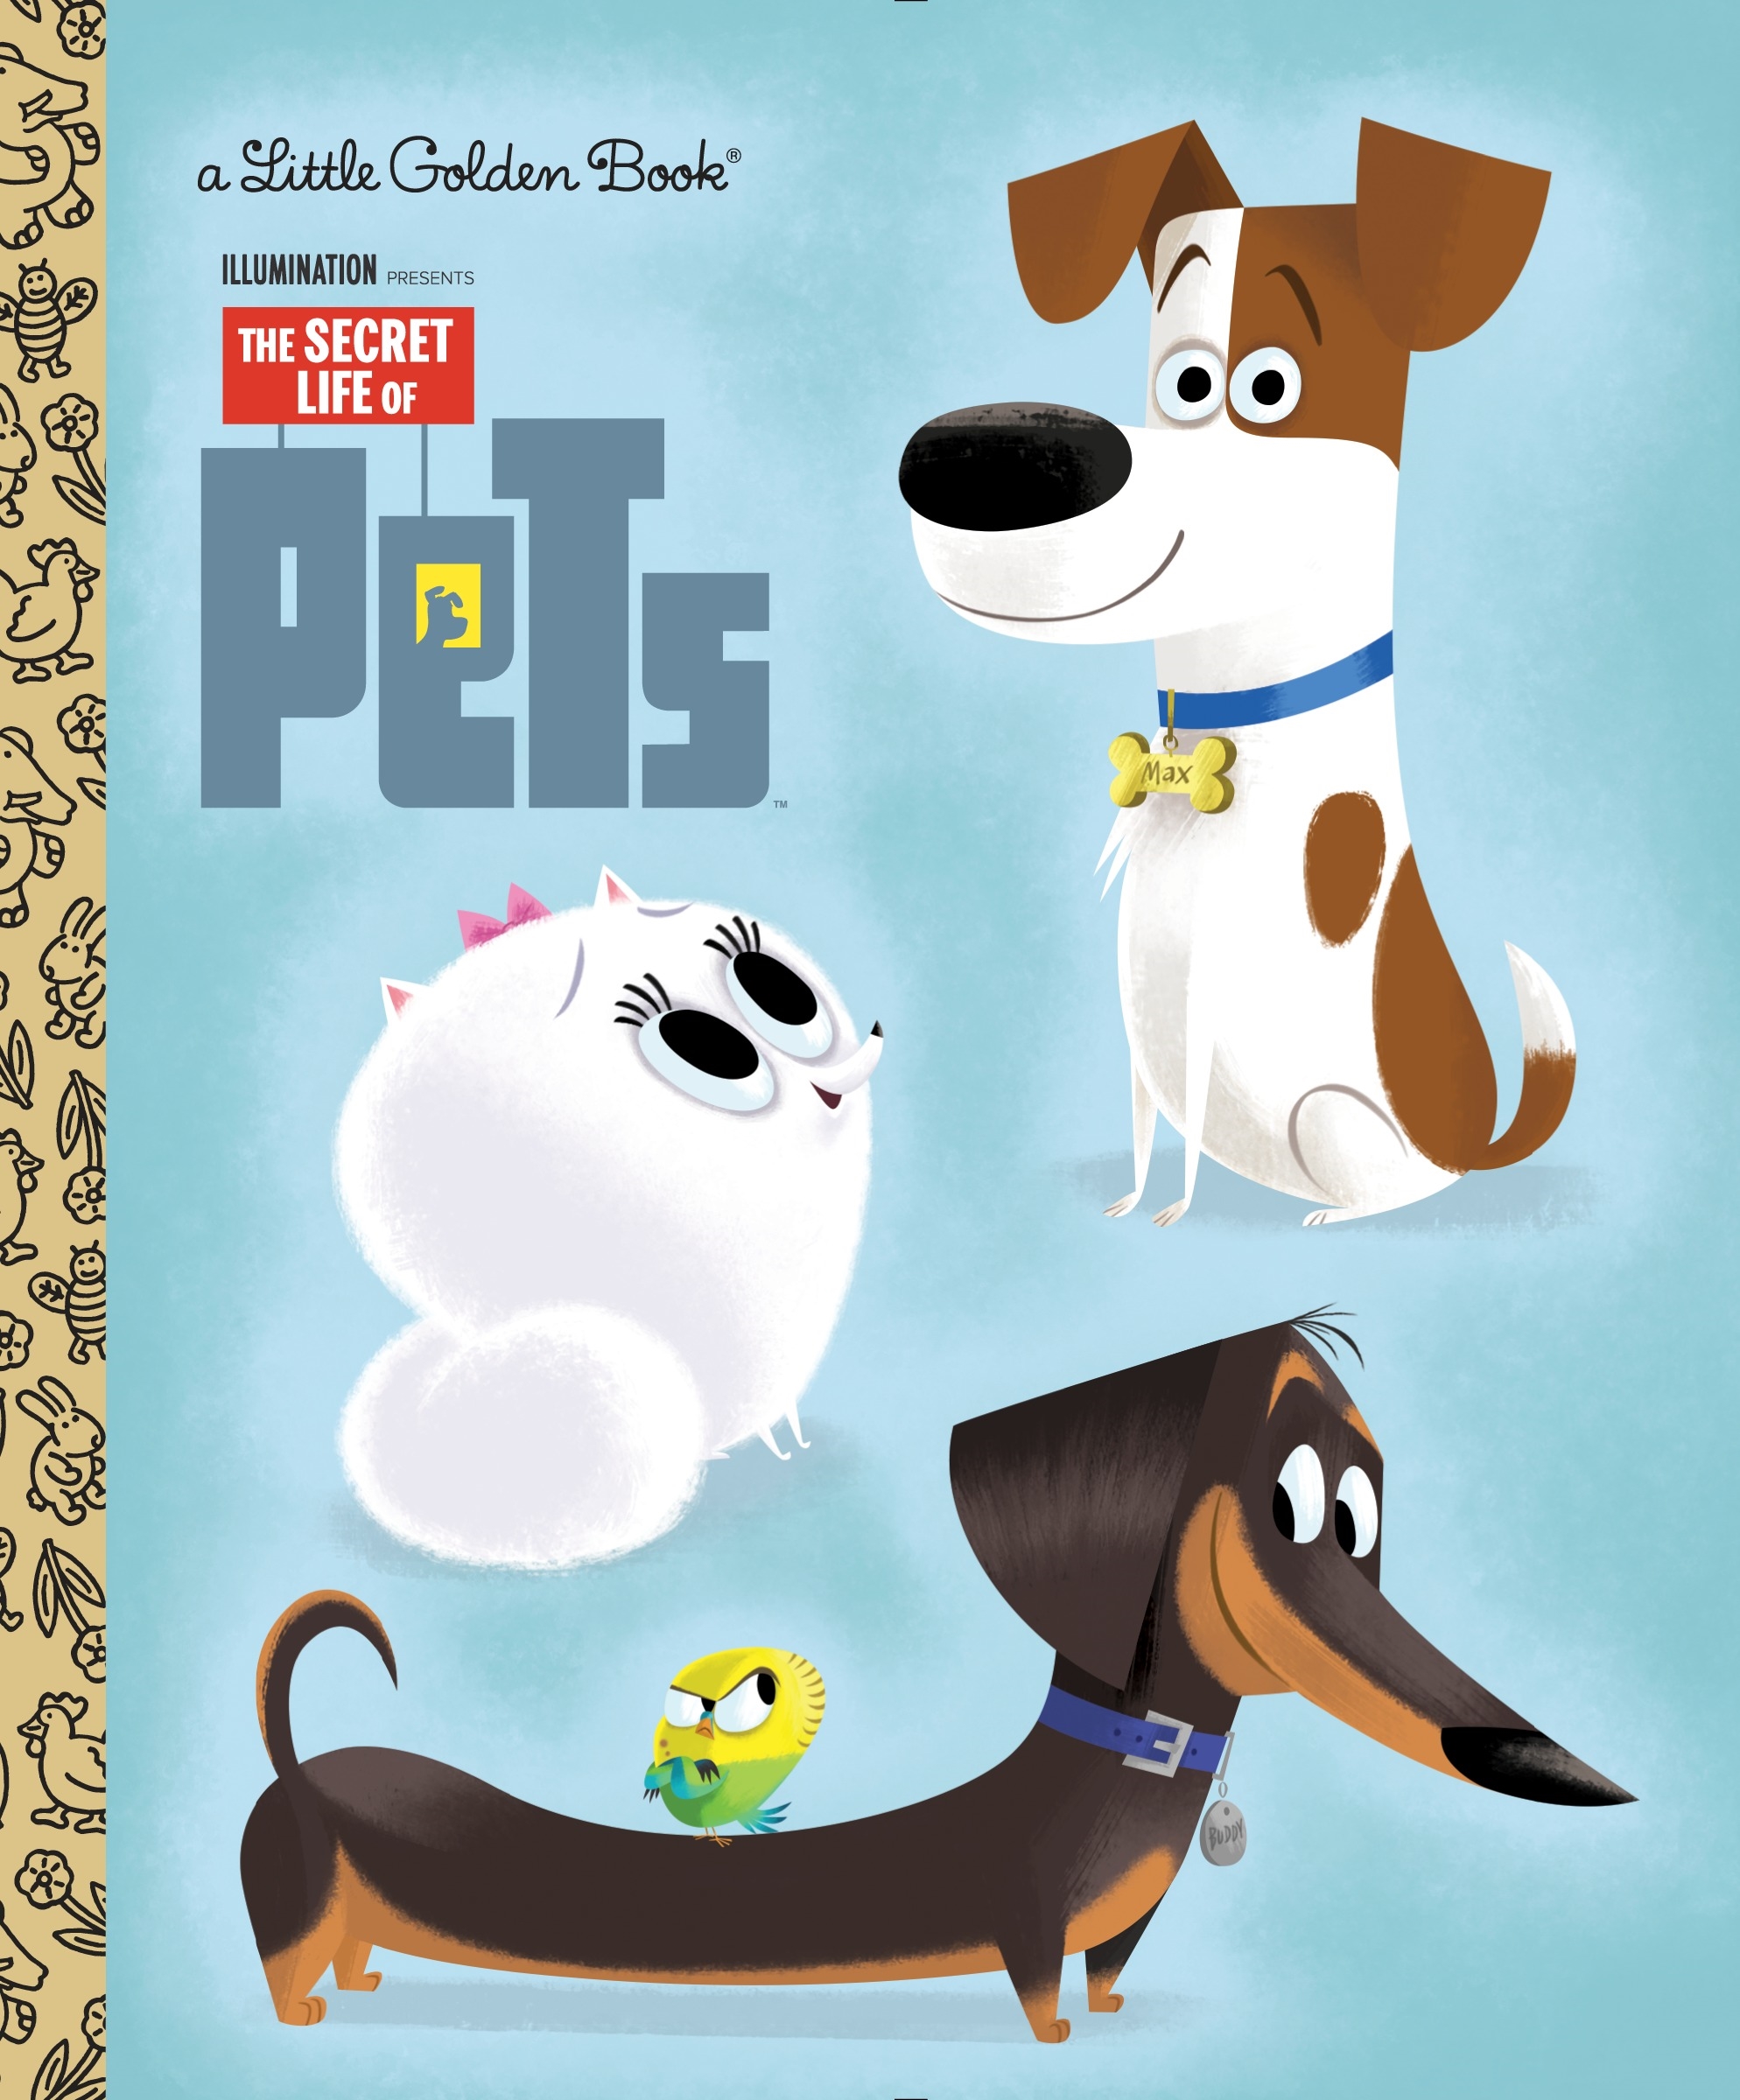 The Secret Life of Pets download the new for windows